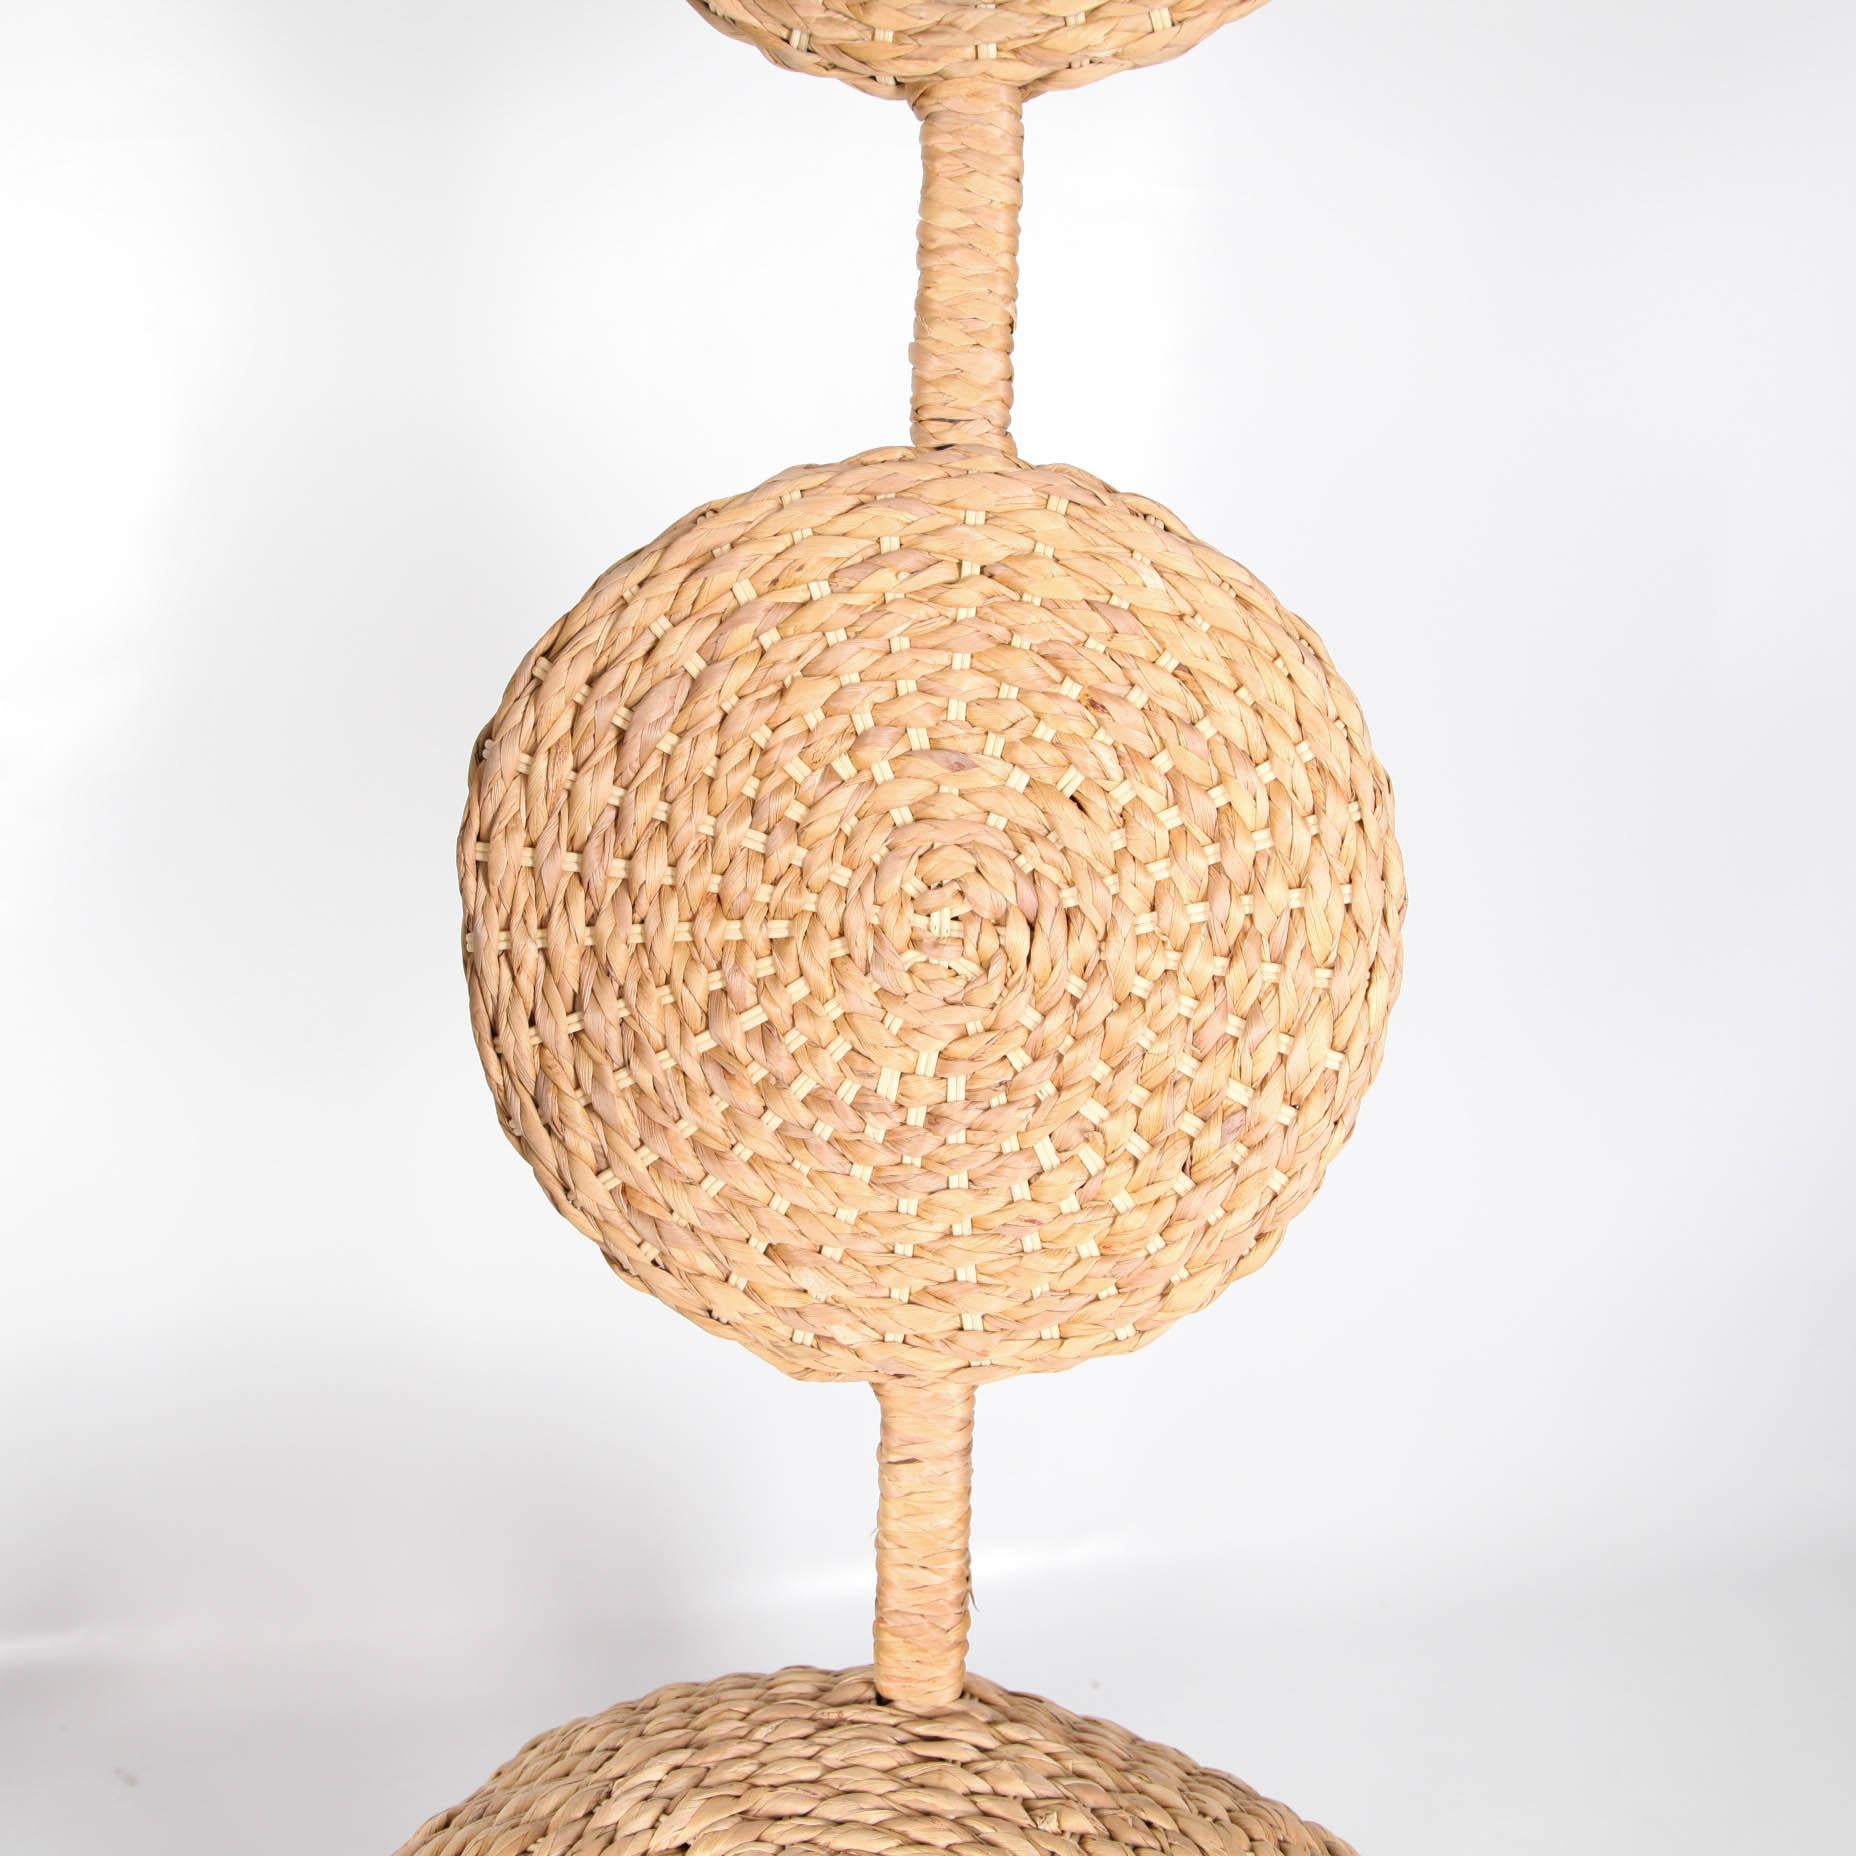 Hand-Woven Pair of Sculptural Chairs in Braided Natural Fiber